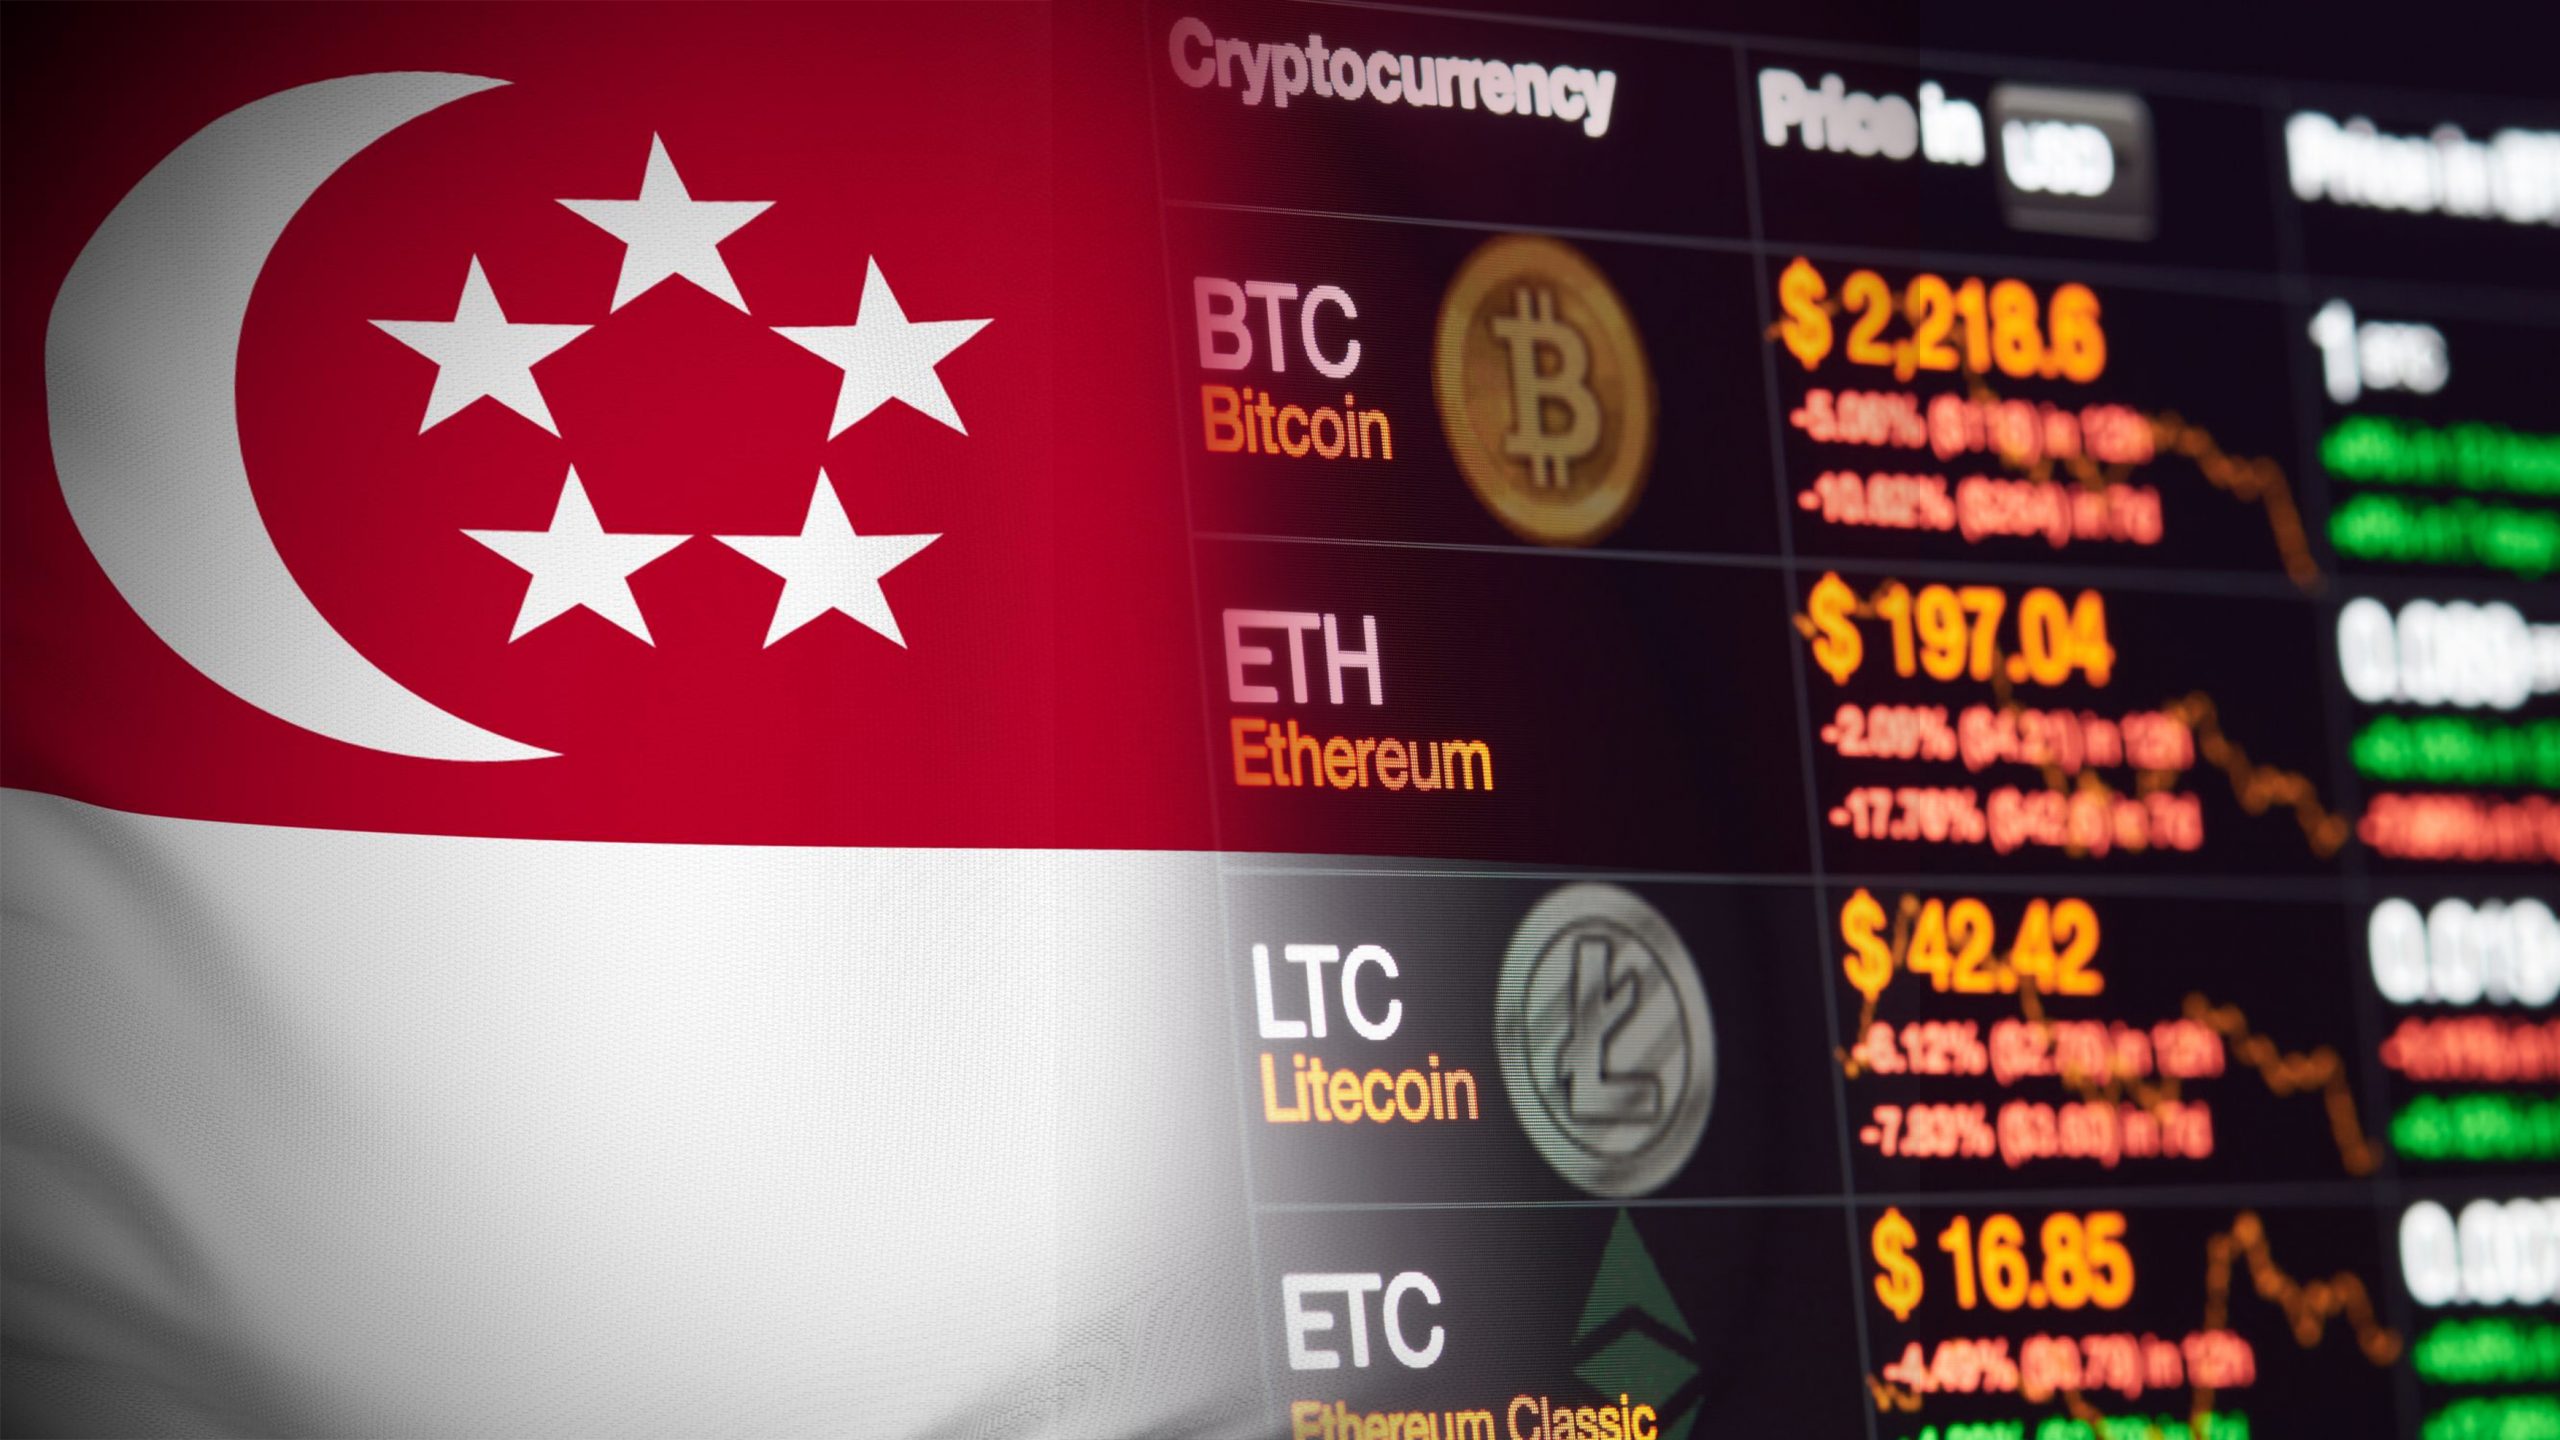 Singapore Requires Foreign Crypto Companies To Obtain Licenses scaled